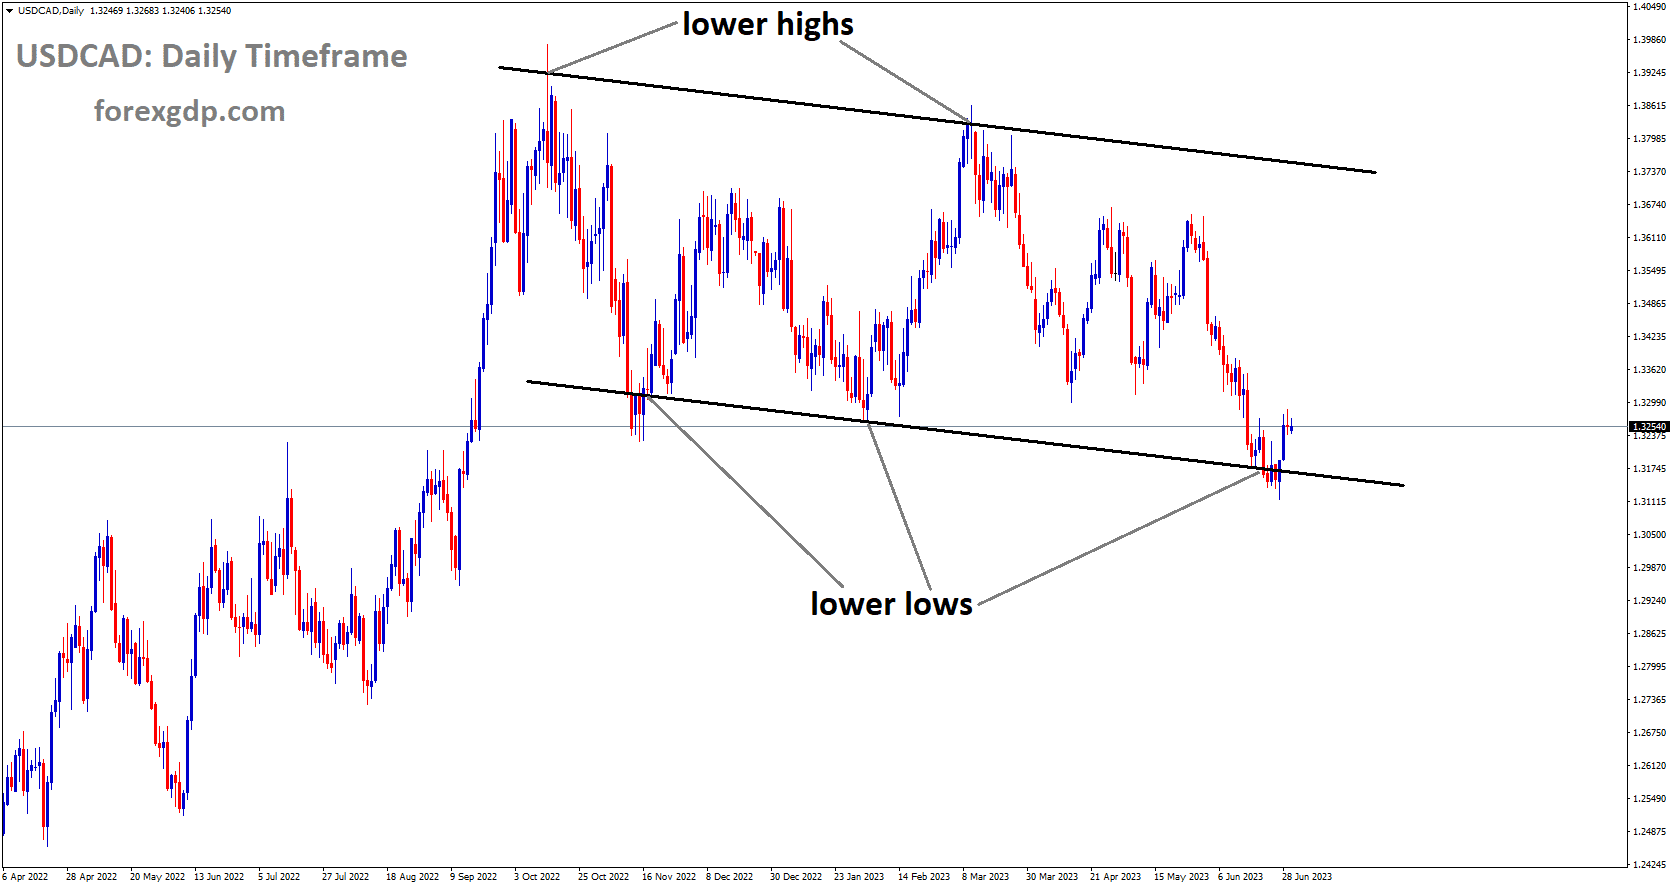 USDCAD is moving in Descending channel and the market has reached the lower low area of the channel.